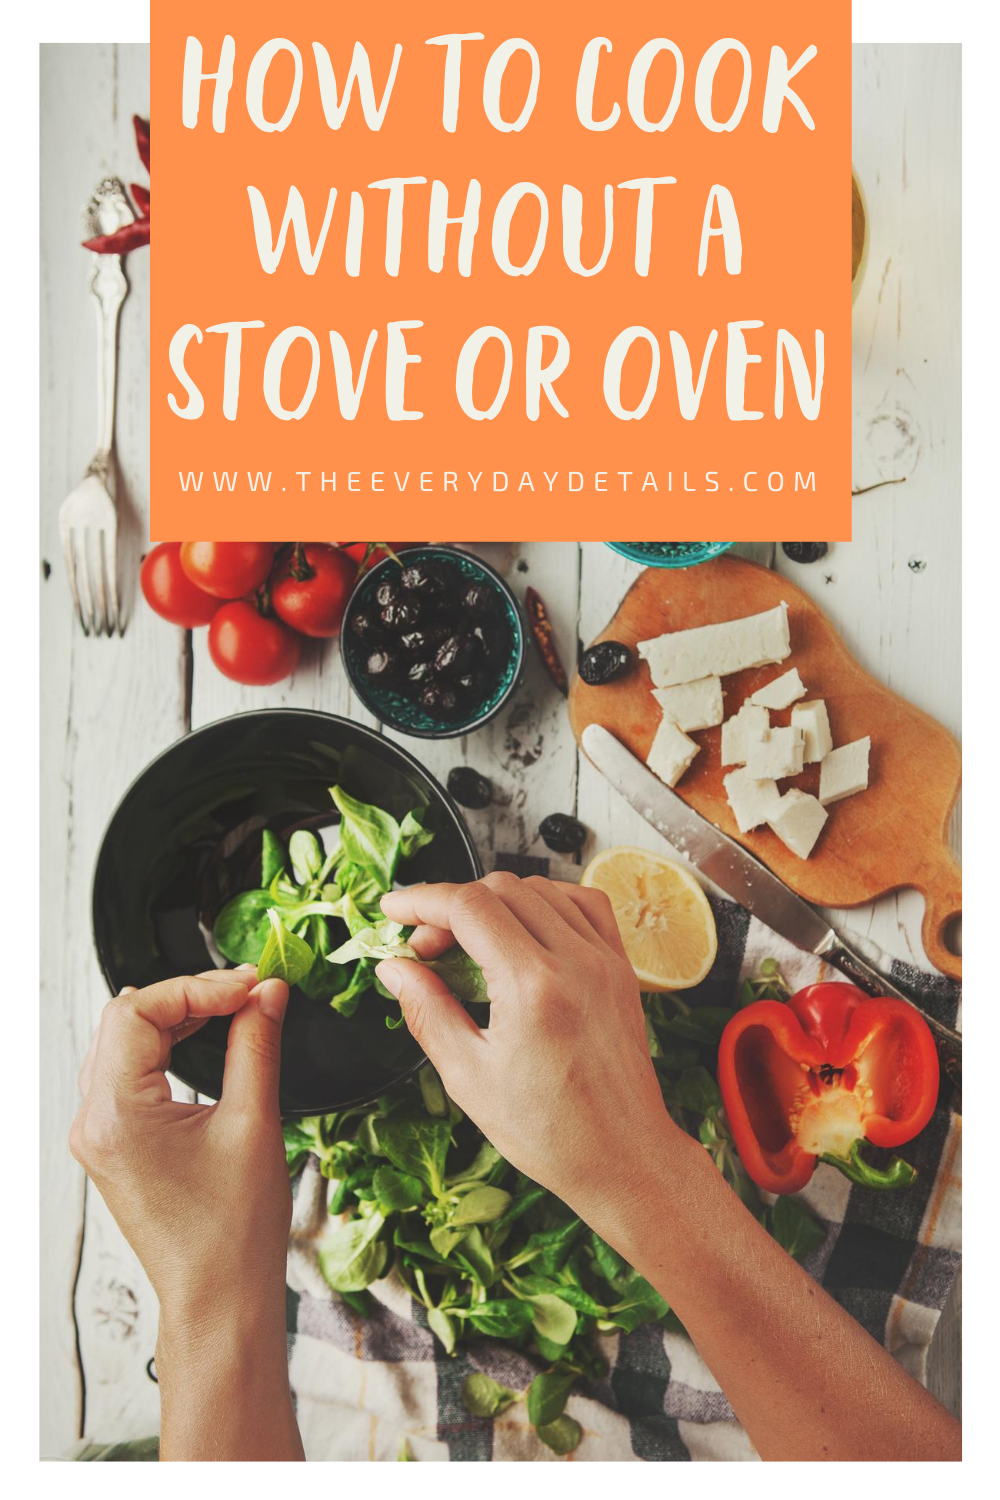 How to Cook Food Without a Stove or Oven